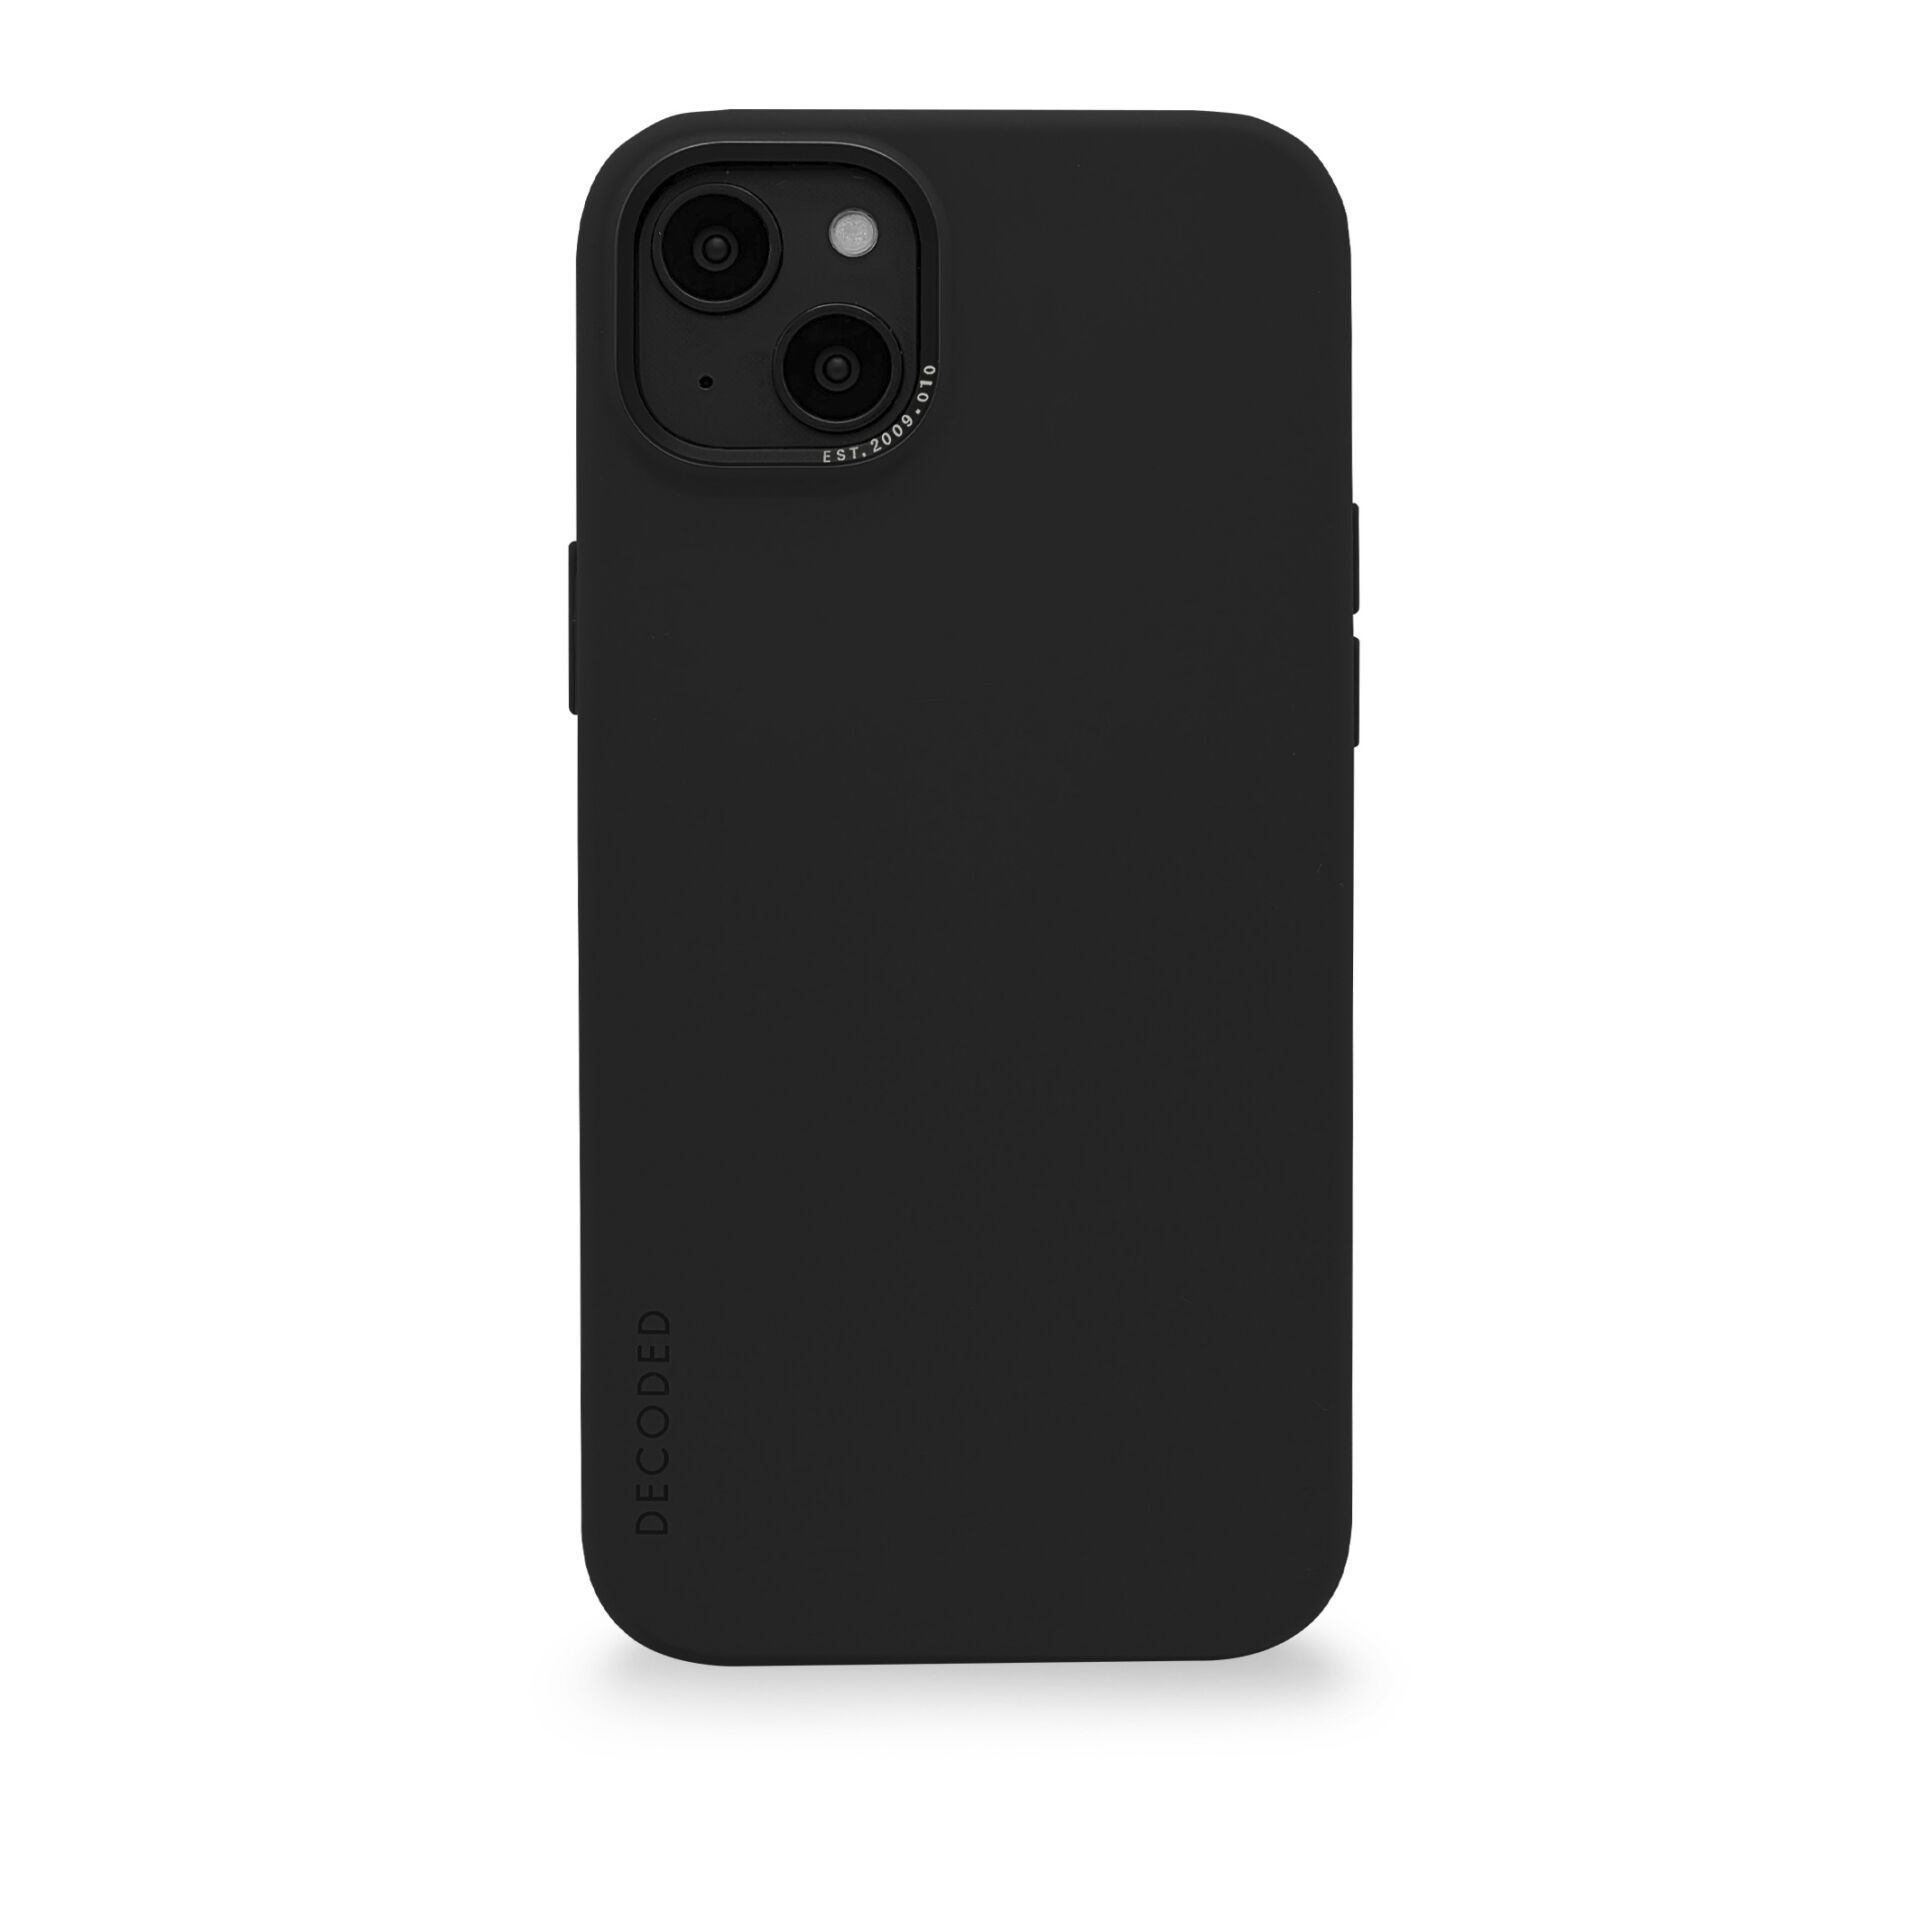 AntiMicrobial DECODED Silicone Plus, iPhone Charcoal, Apple, Backcover, 14 Charcoal Backcover